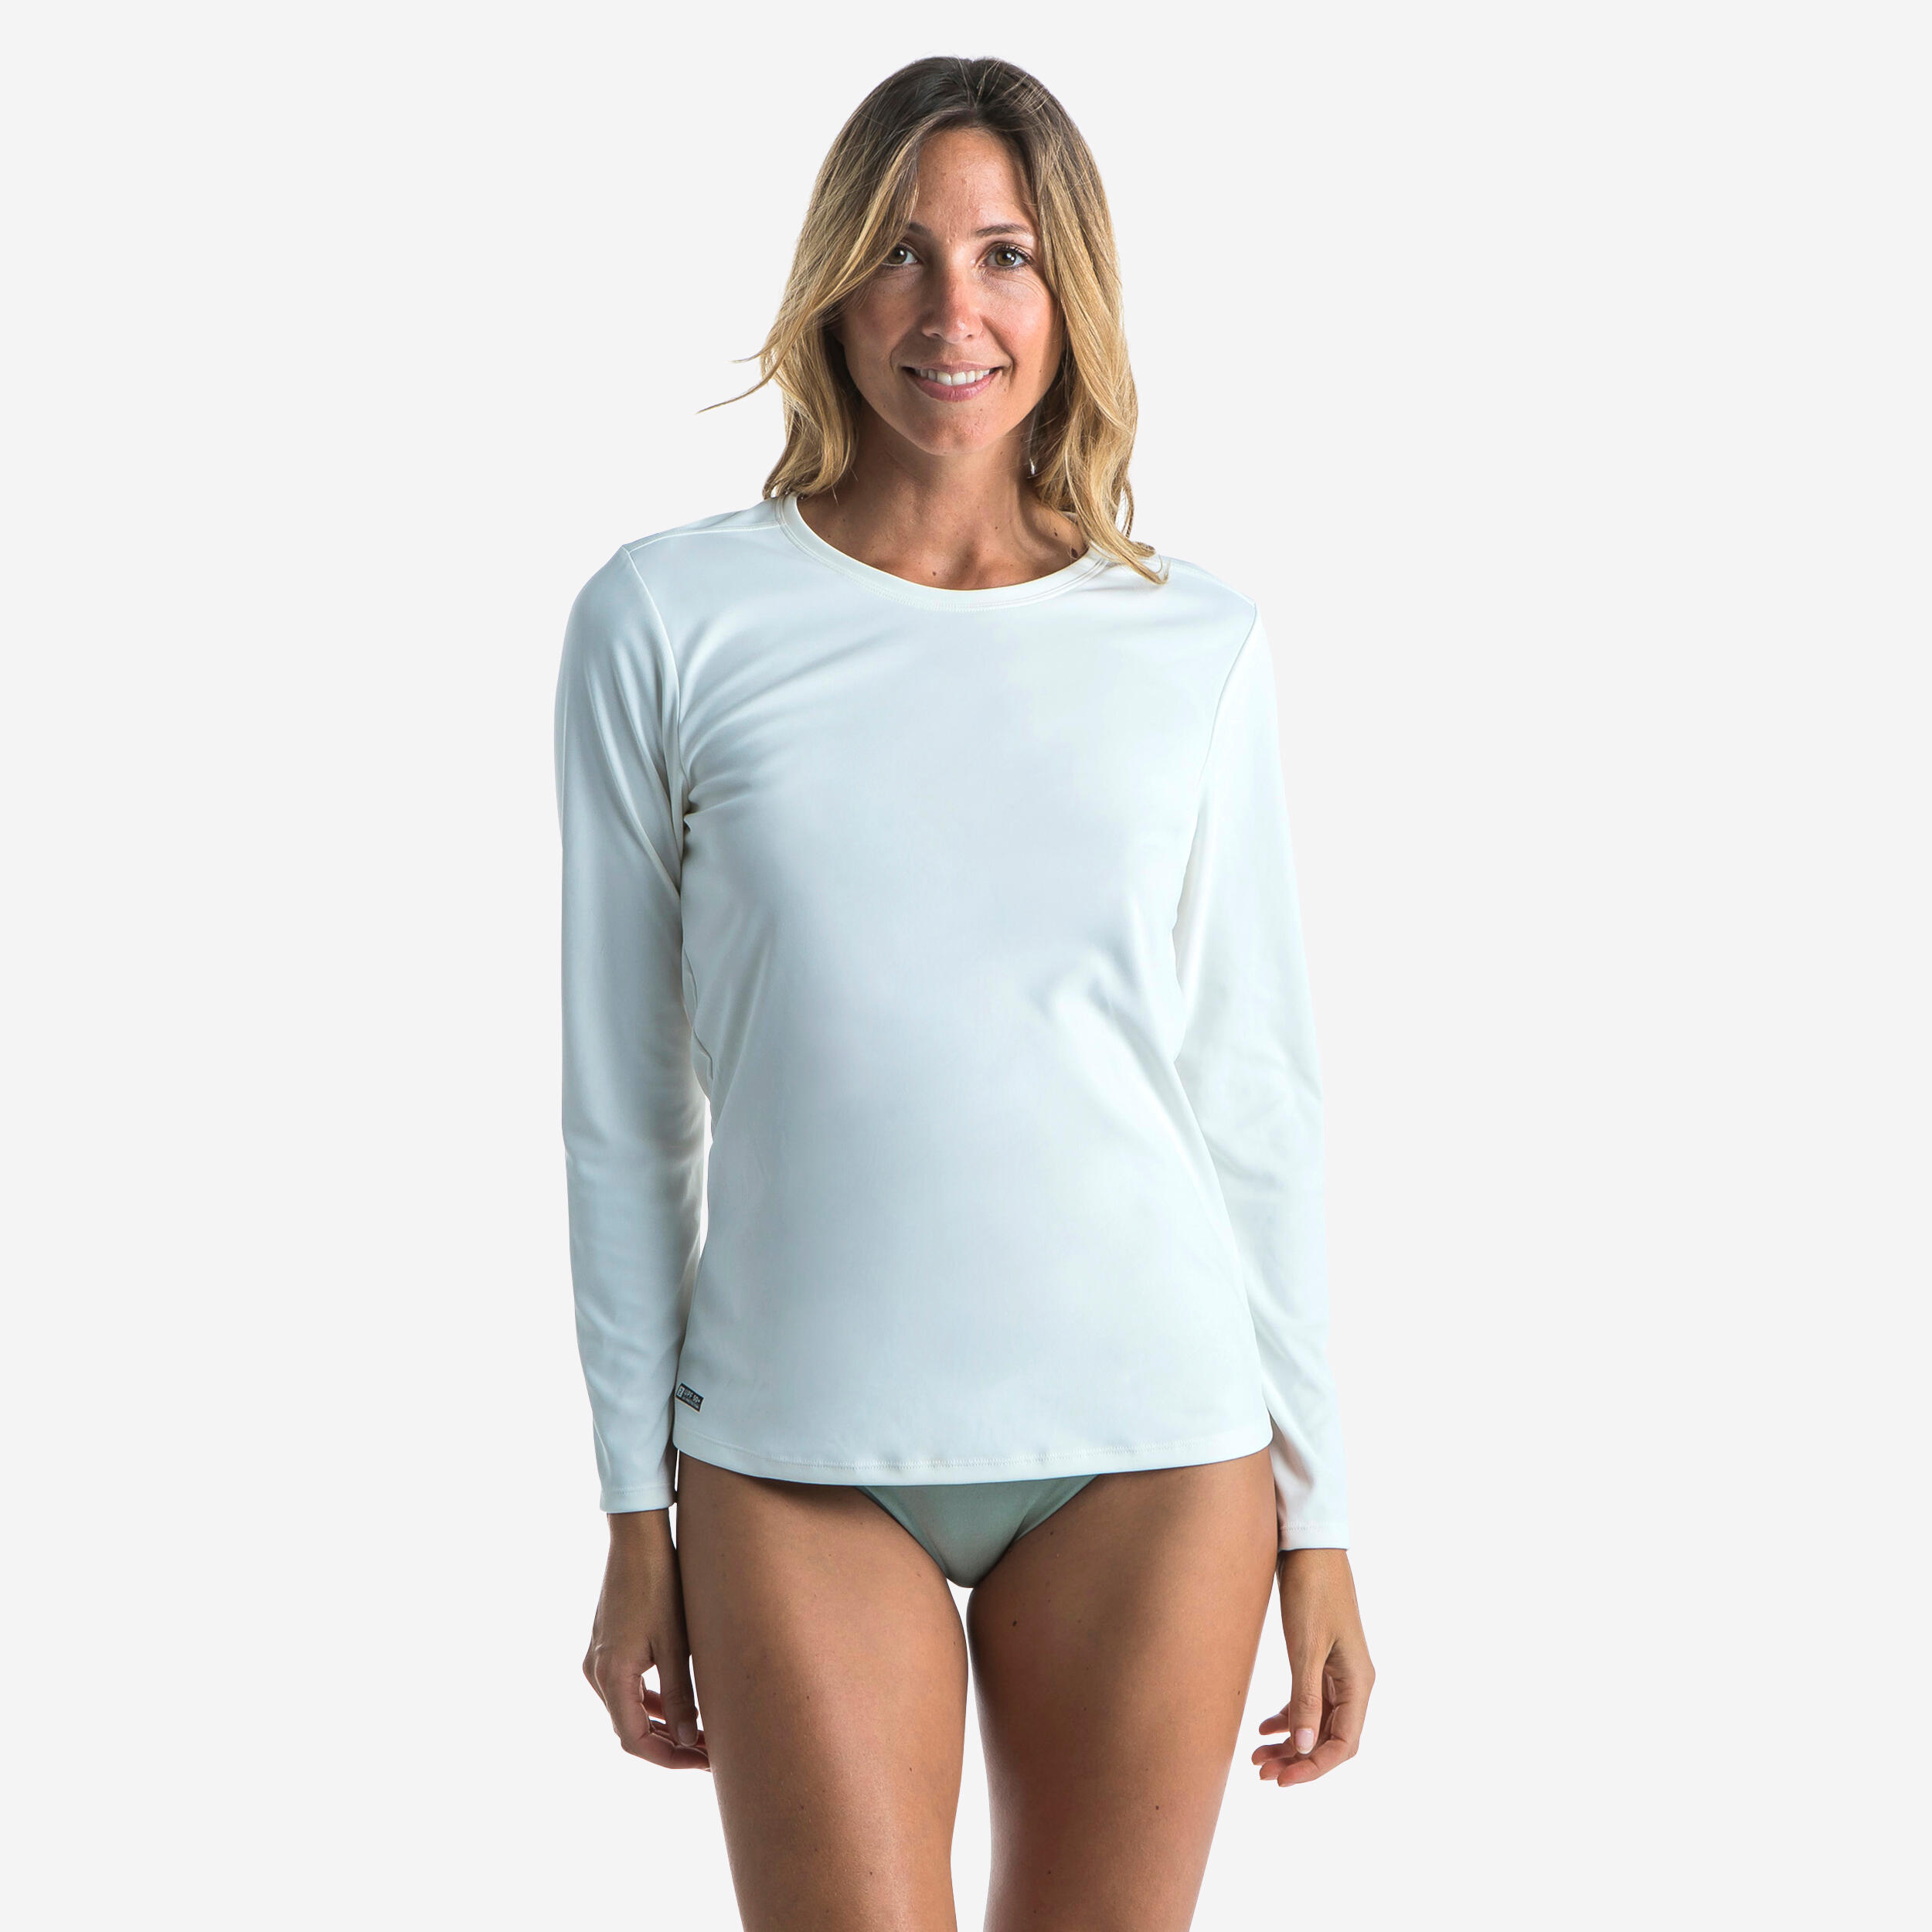 WOMEN’S SURFING LONG-SLEEVED UV-RESISTANT T-SHIRT MALOU GREIGE (UNDYED) 1/11